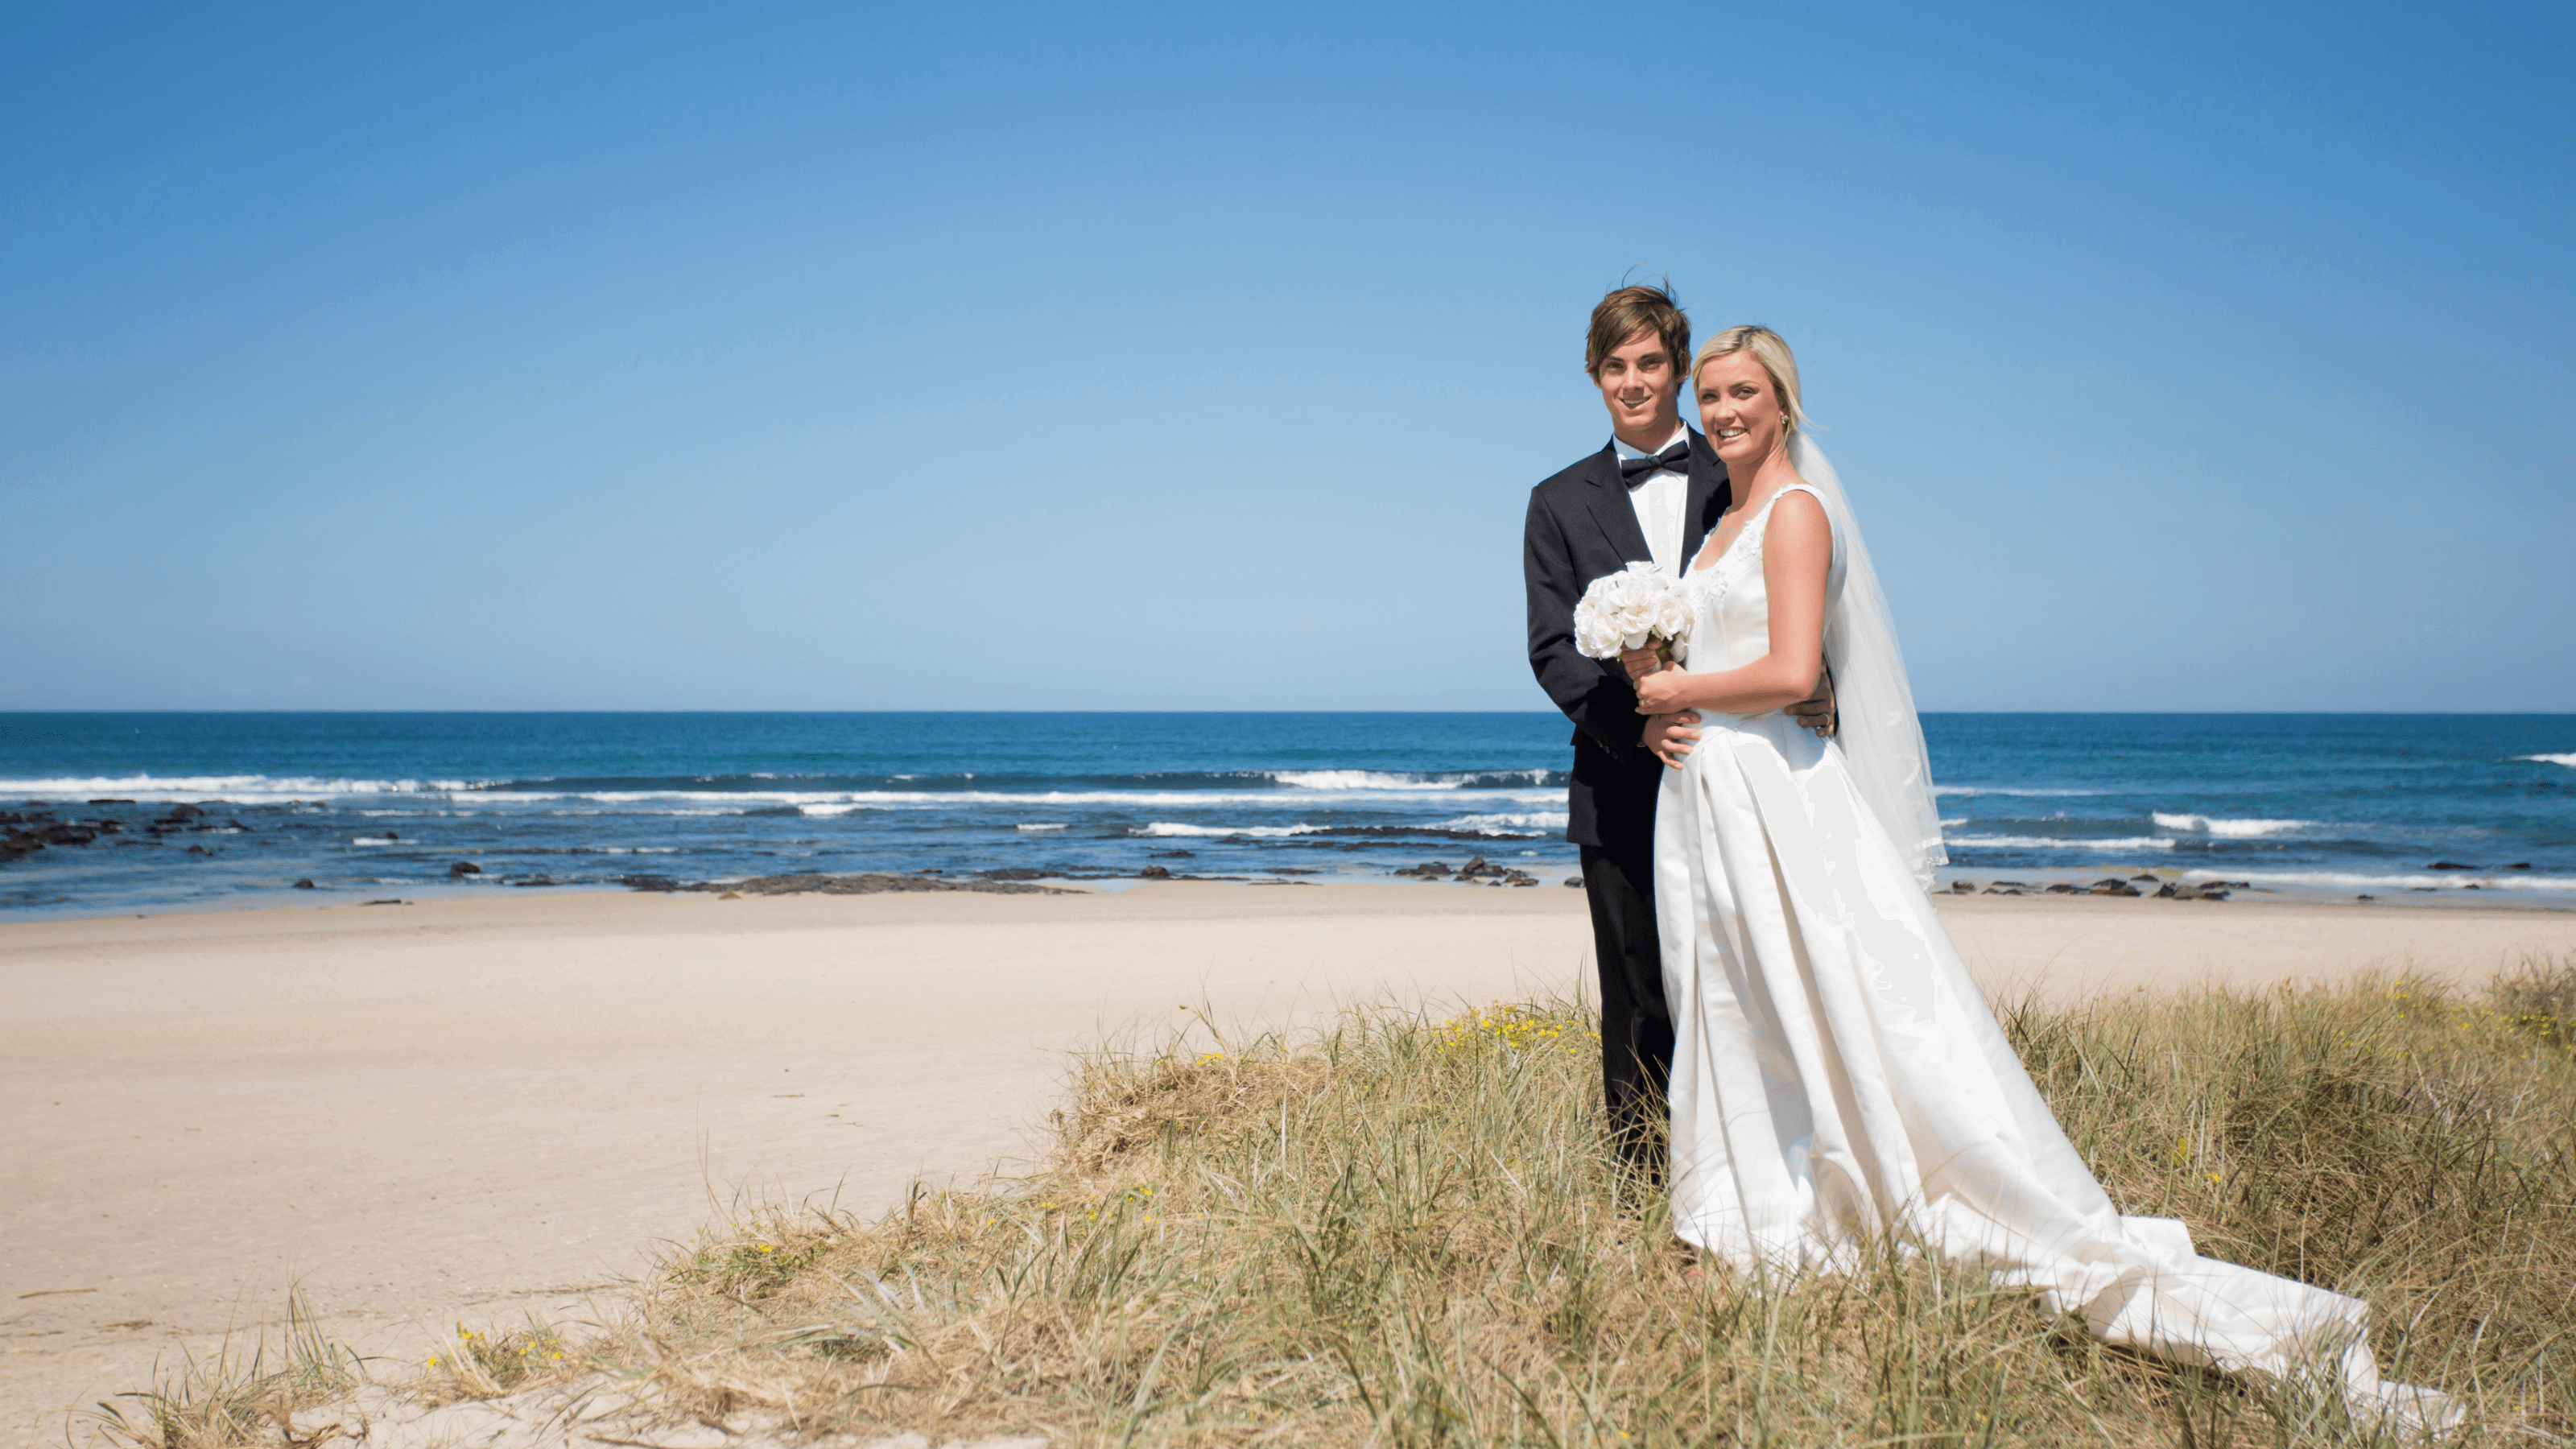 Destination wedding packages by Southern beach weddings